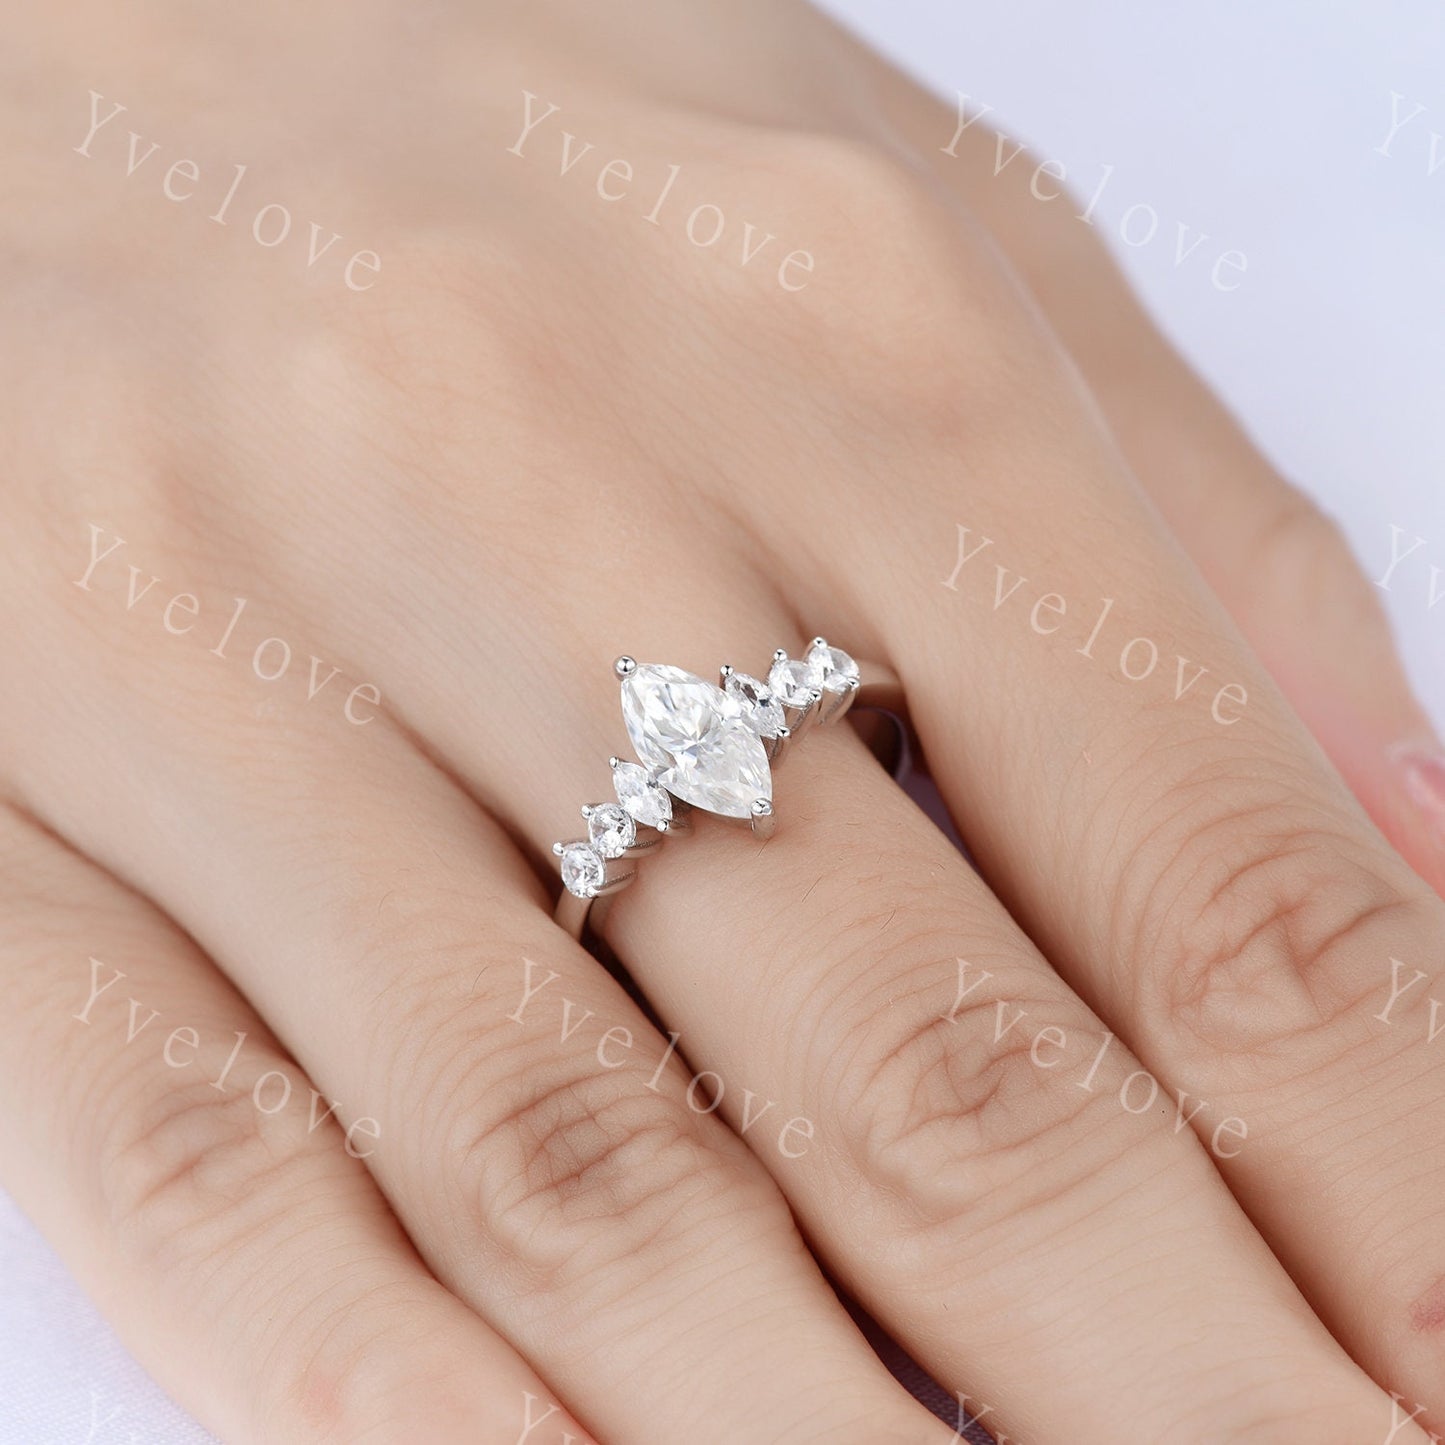 1.5ct Marquise cut Moissanite Bridal Ring, 14K White Gold Ring, Moissanite Engagement Ring, Unique Wedding Ring, Platinum Ring gift for her